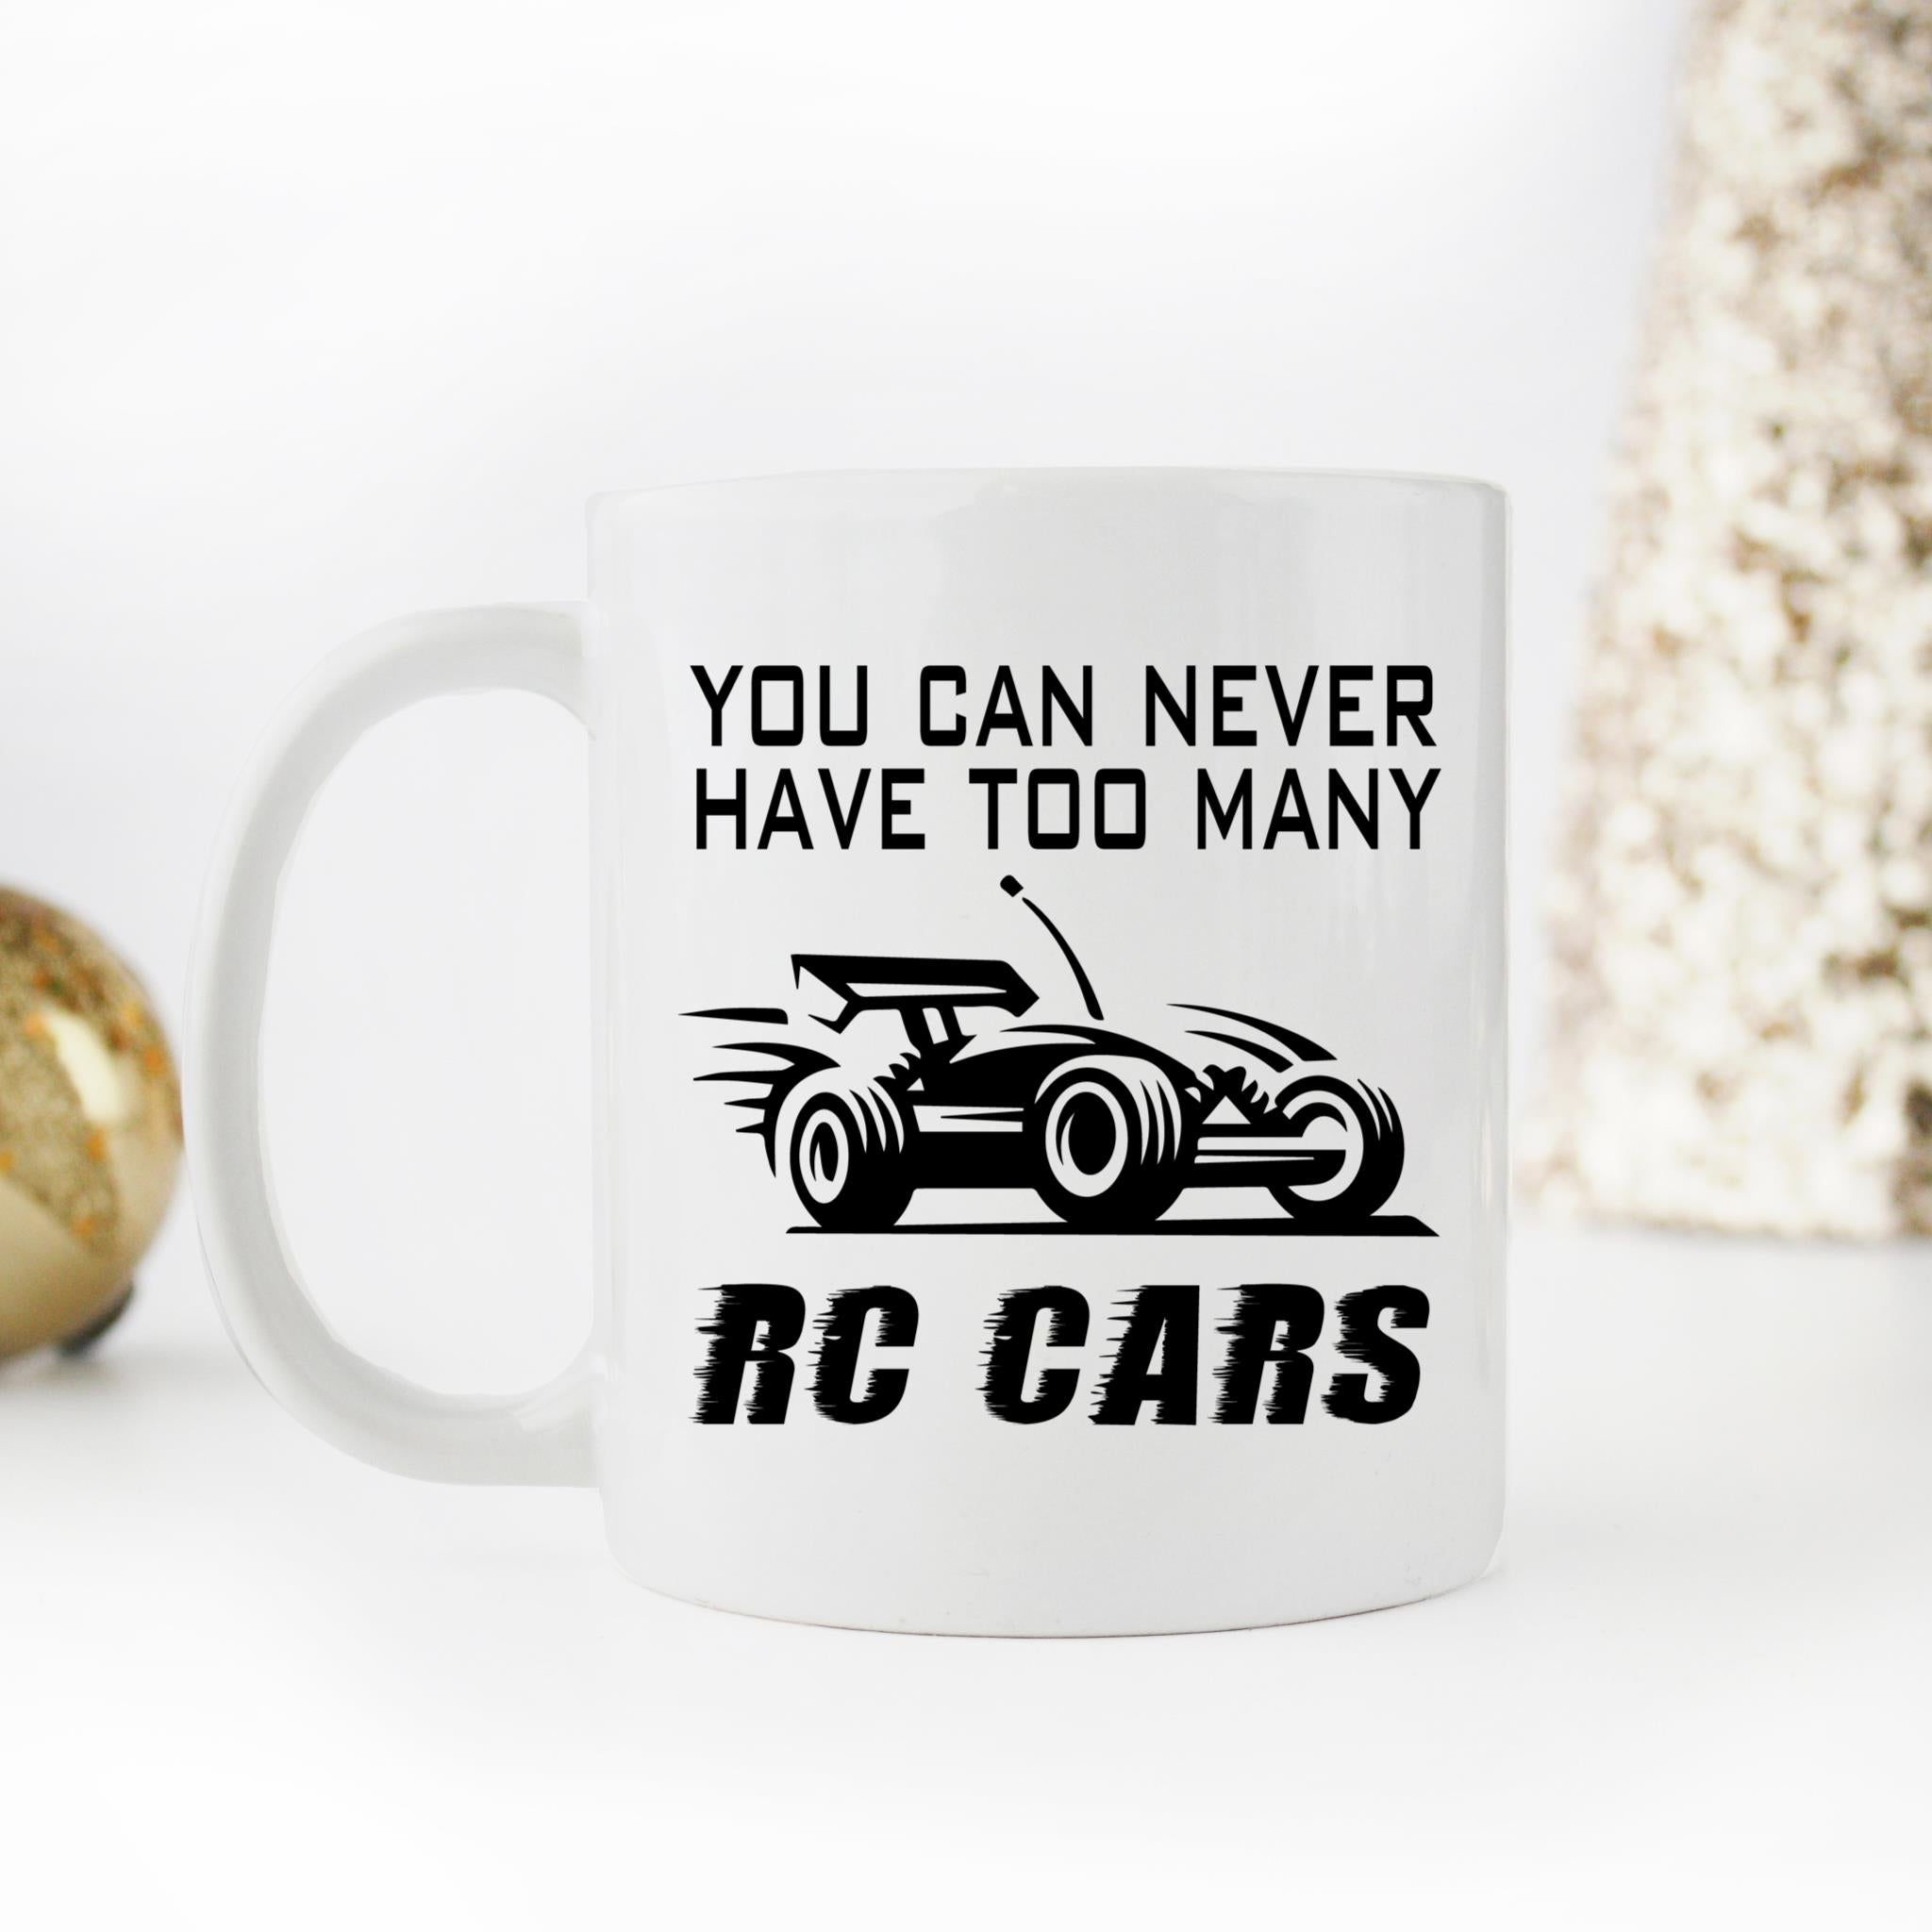 Skitongifts Funny Ceramic Novelty Coffee Mug You Can Never Have Too Many Rc Car cOsmtkm